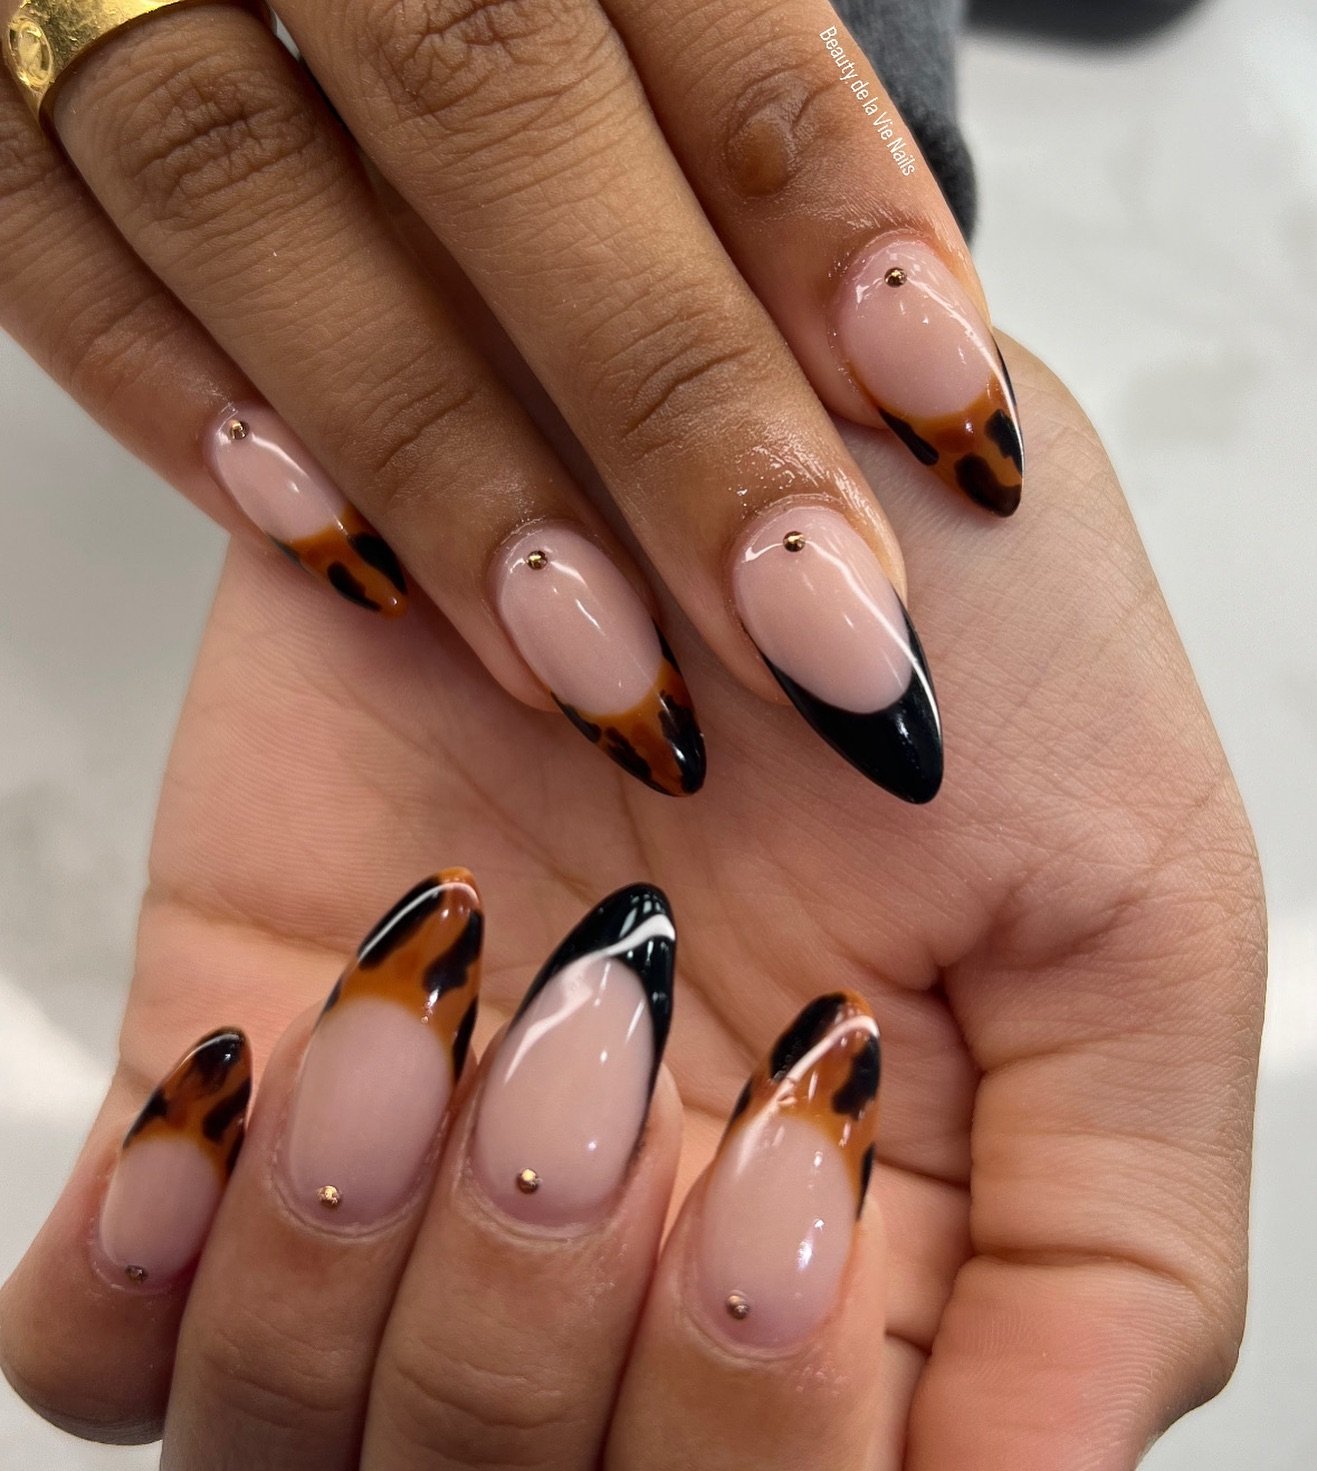 Love this animal print french set 🤎 Summer is on the way, time to get our nails beautified. Book an appointment with us at Beauty de la Vie Nails!

🤍OUR 20% GRAND OPENING DISCOUNT IS STILL AVAILABLE!🤍 We hope to see you soon☺️

📍Meadowtown Shoppi